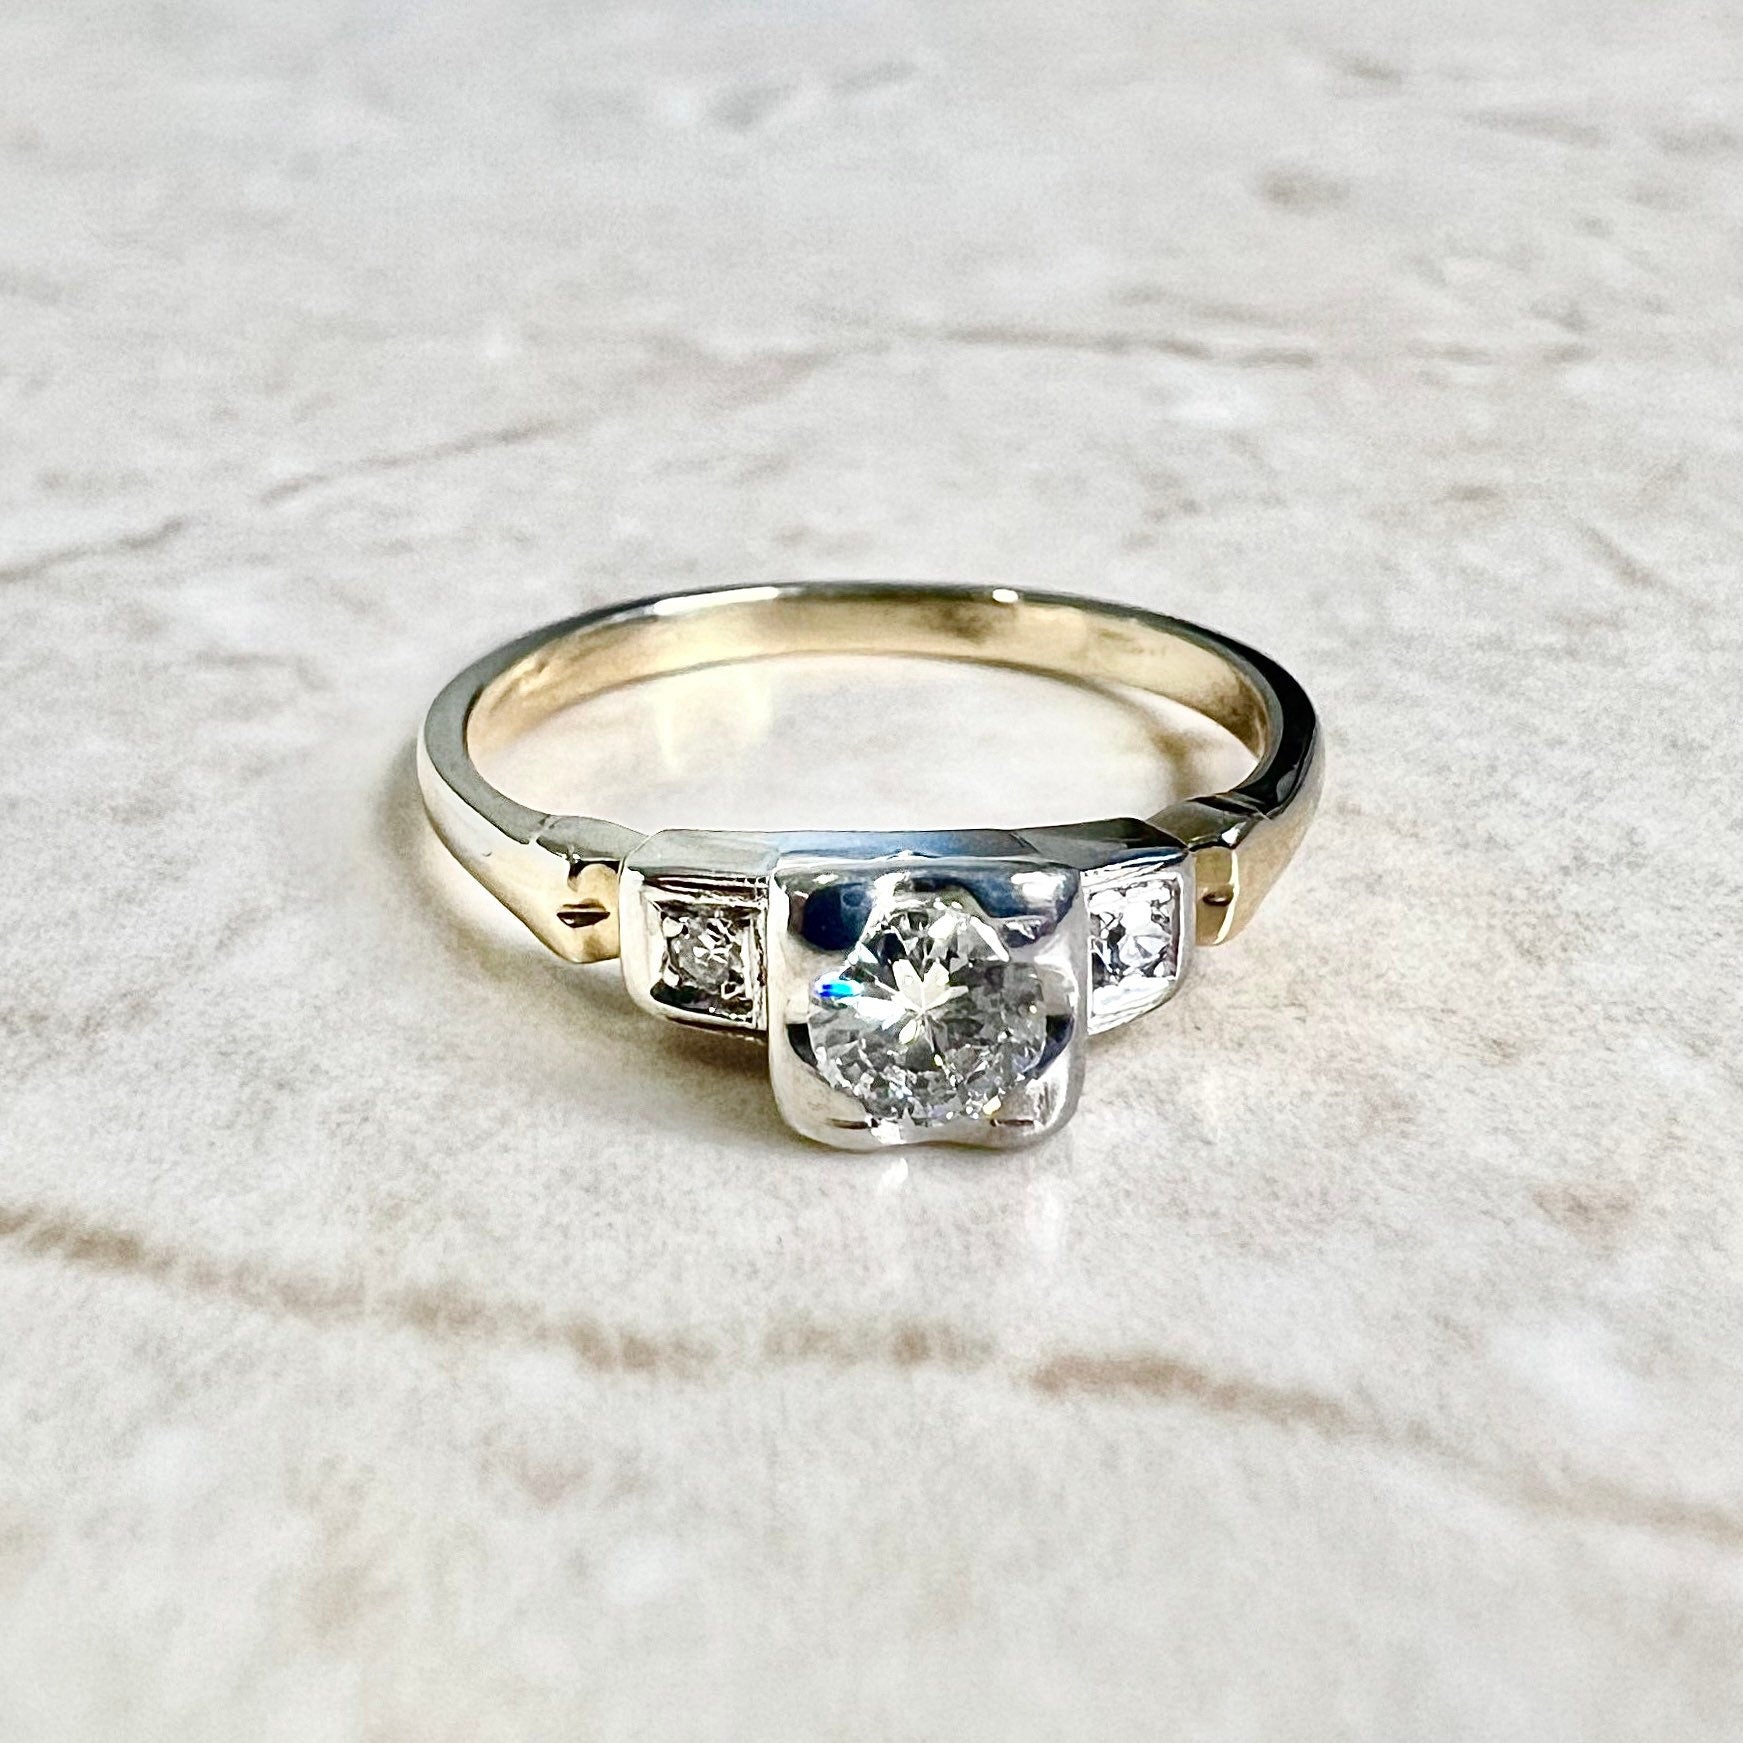 Vintage Retro Diamond Engagement Ring Circa 1940 - 14K Two Tone Gold Ring - Vintage Solitaire - Diamond Solitaire Ring- 3 Stone Wedding Ring